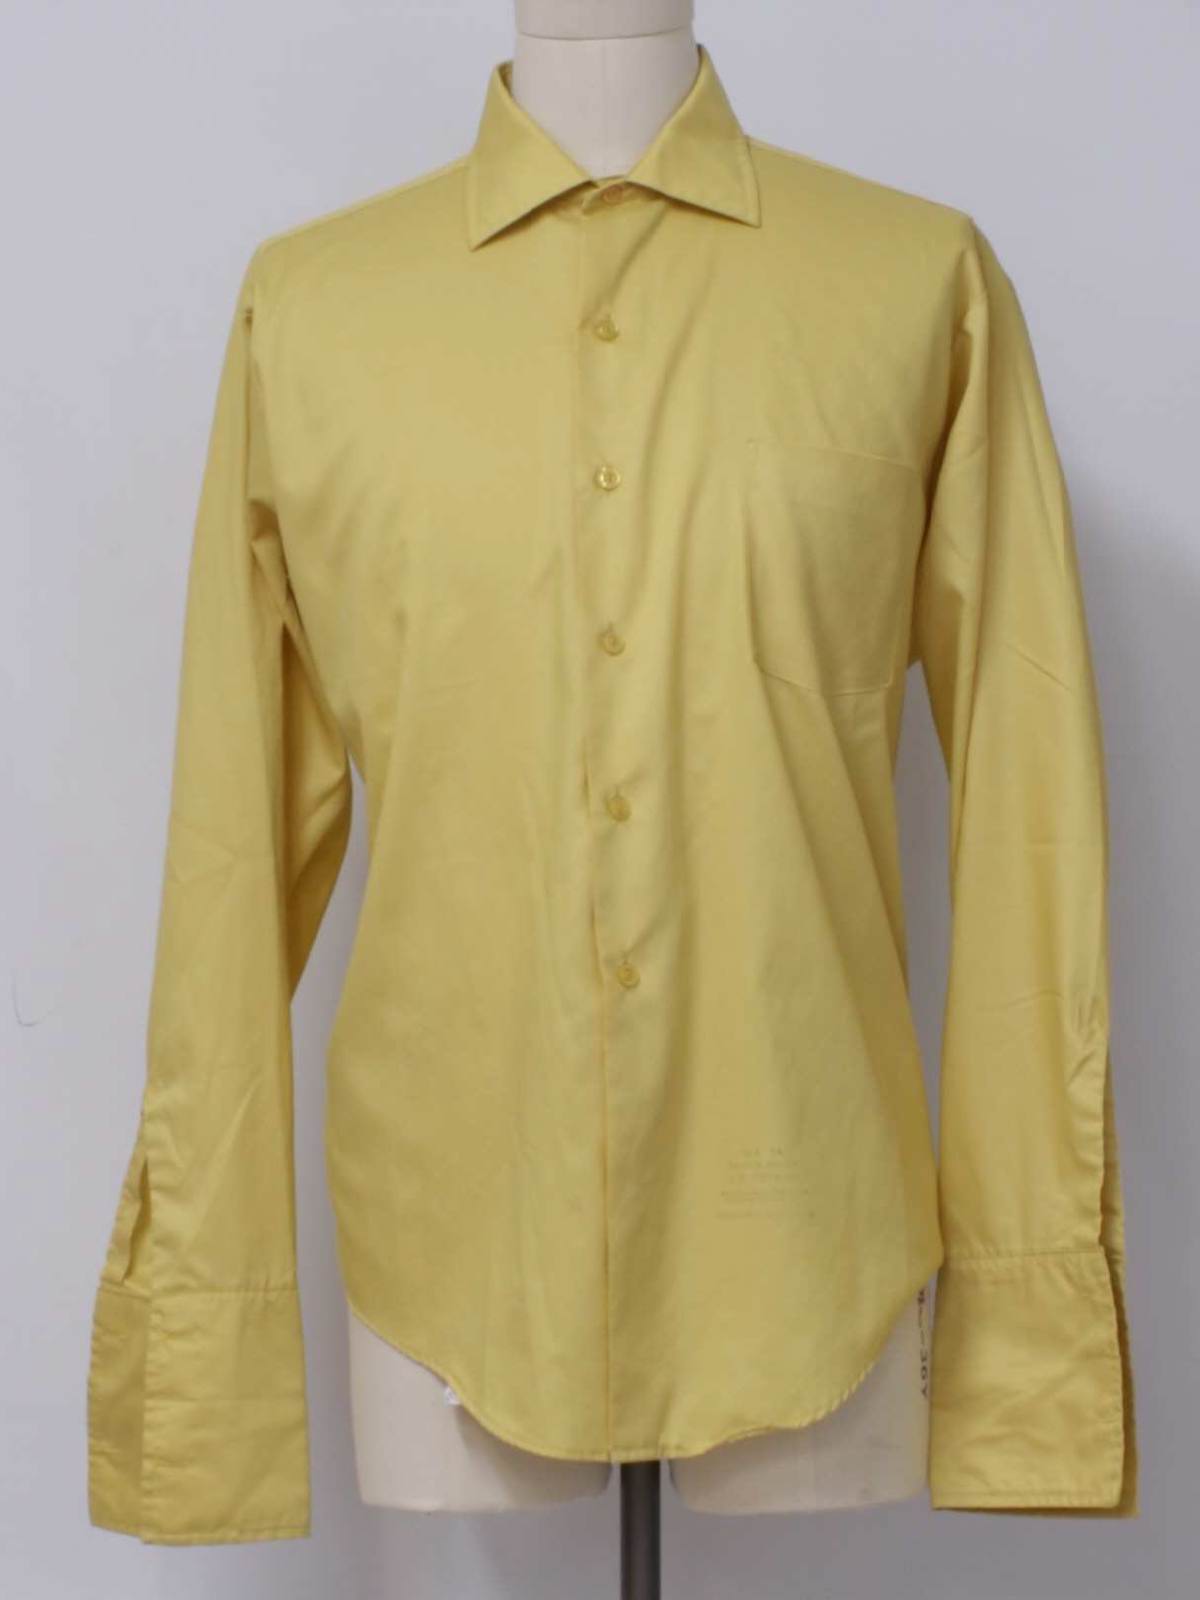 Hampshire House by VanHeusen 60's Vintage Shirt: 60s -Hampshire House ...